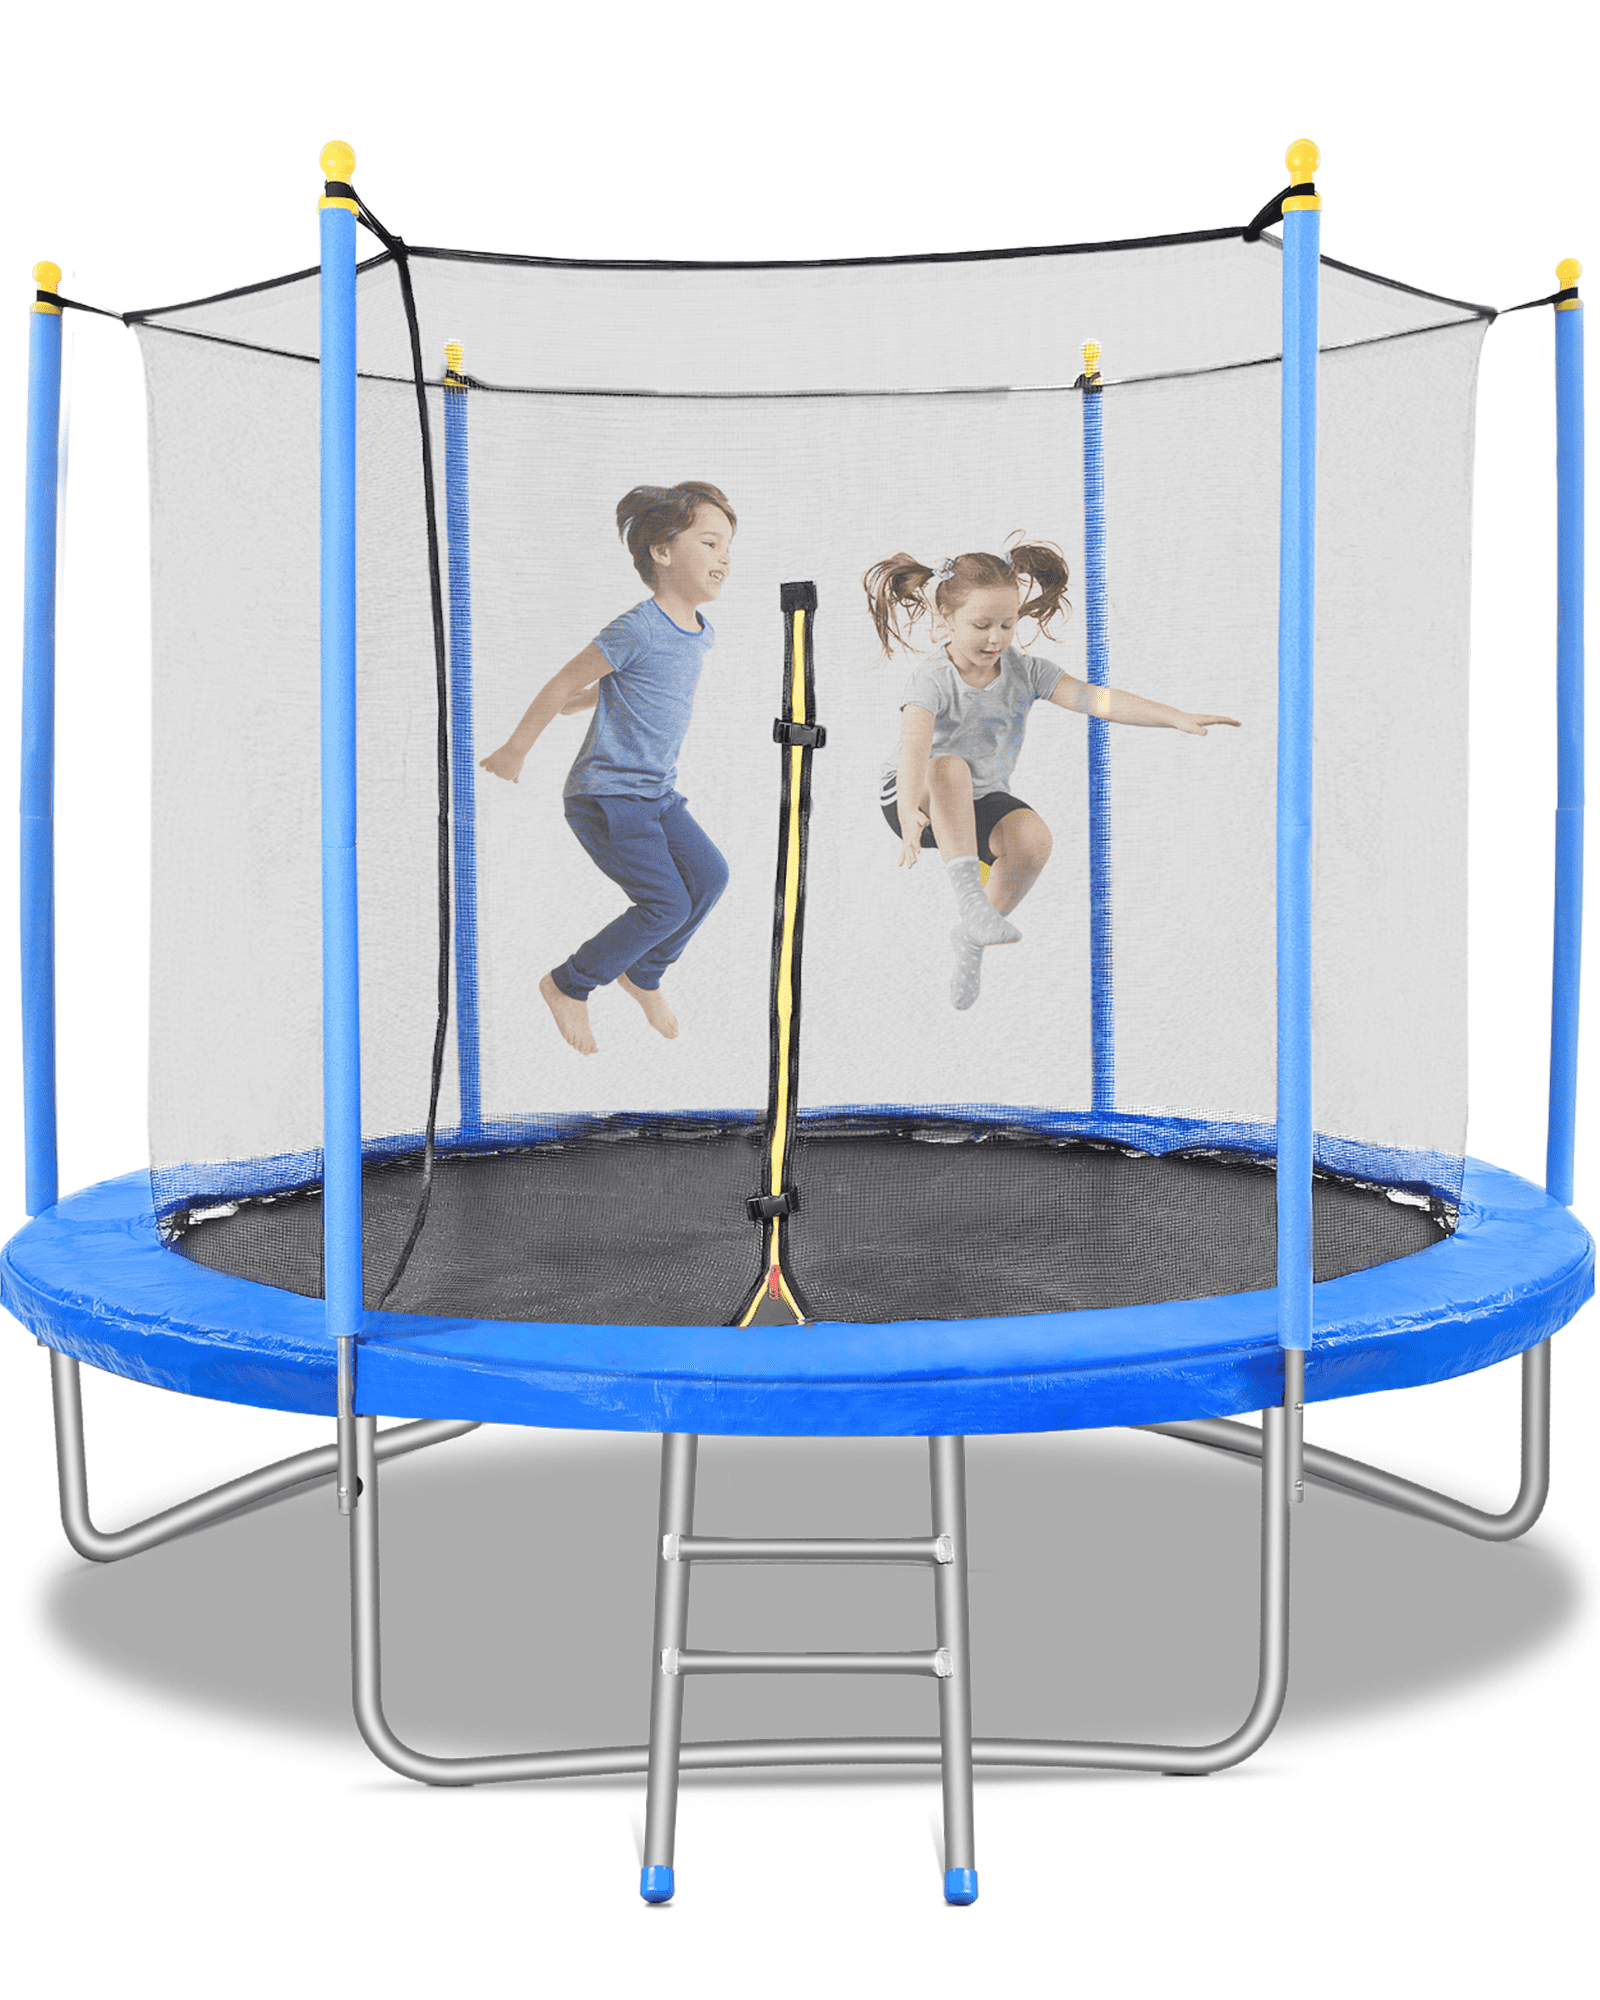 Jump Power 10ft Trampoline and Enclosure Fast 2 working day delivery. 